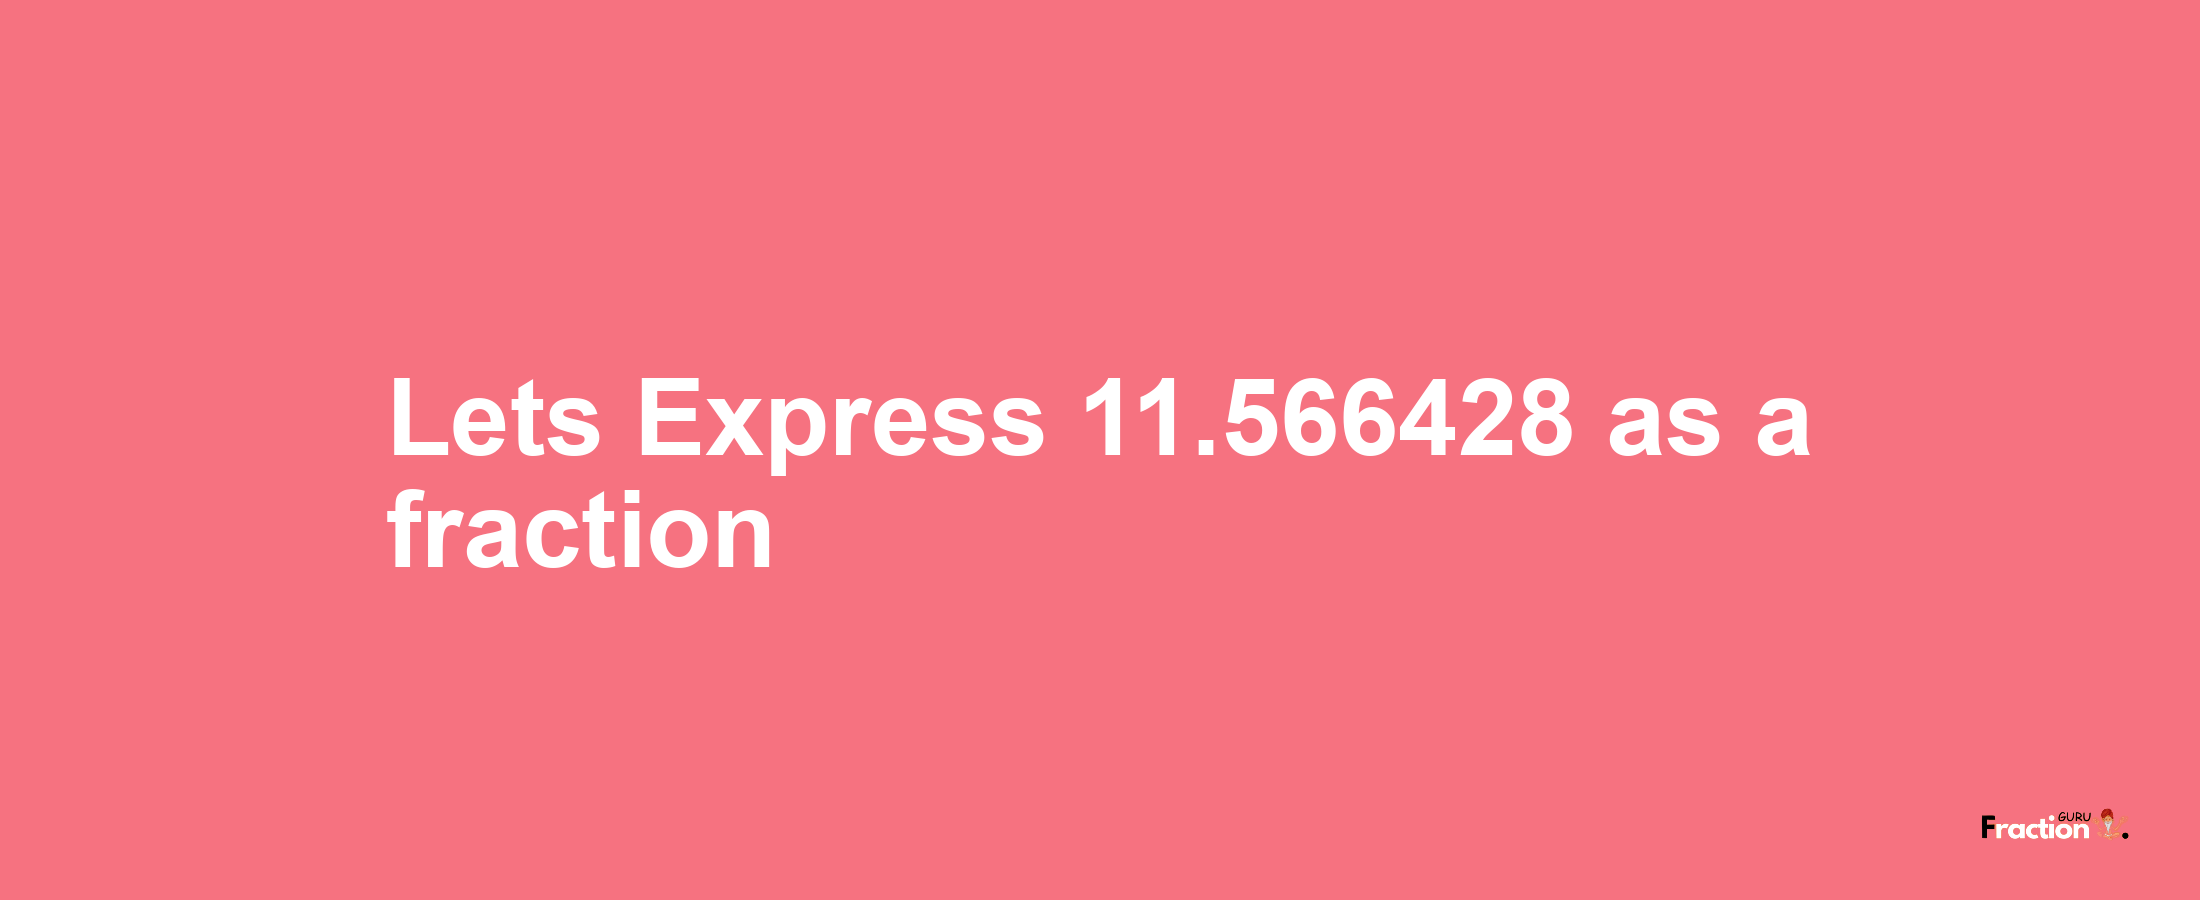 Lets Express 11.566428 as afraction